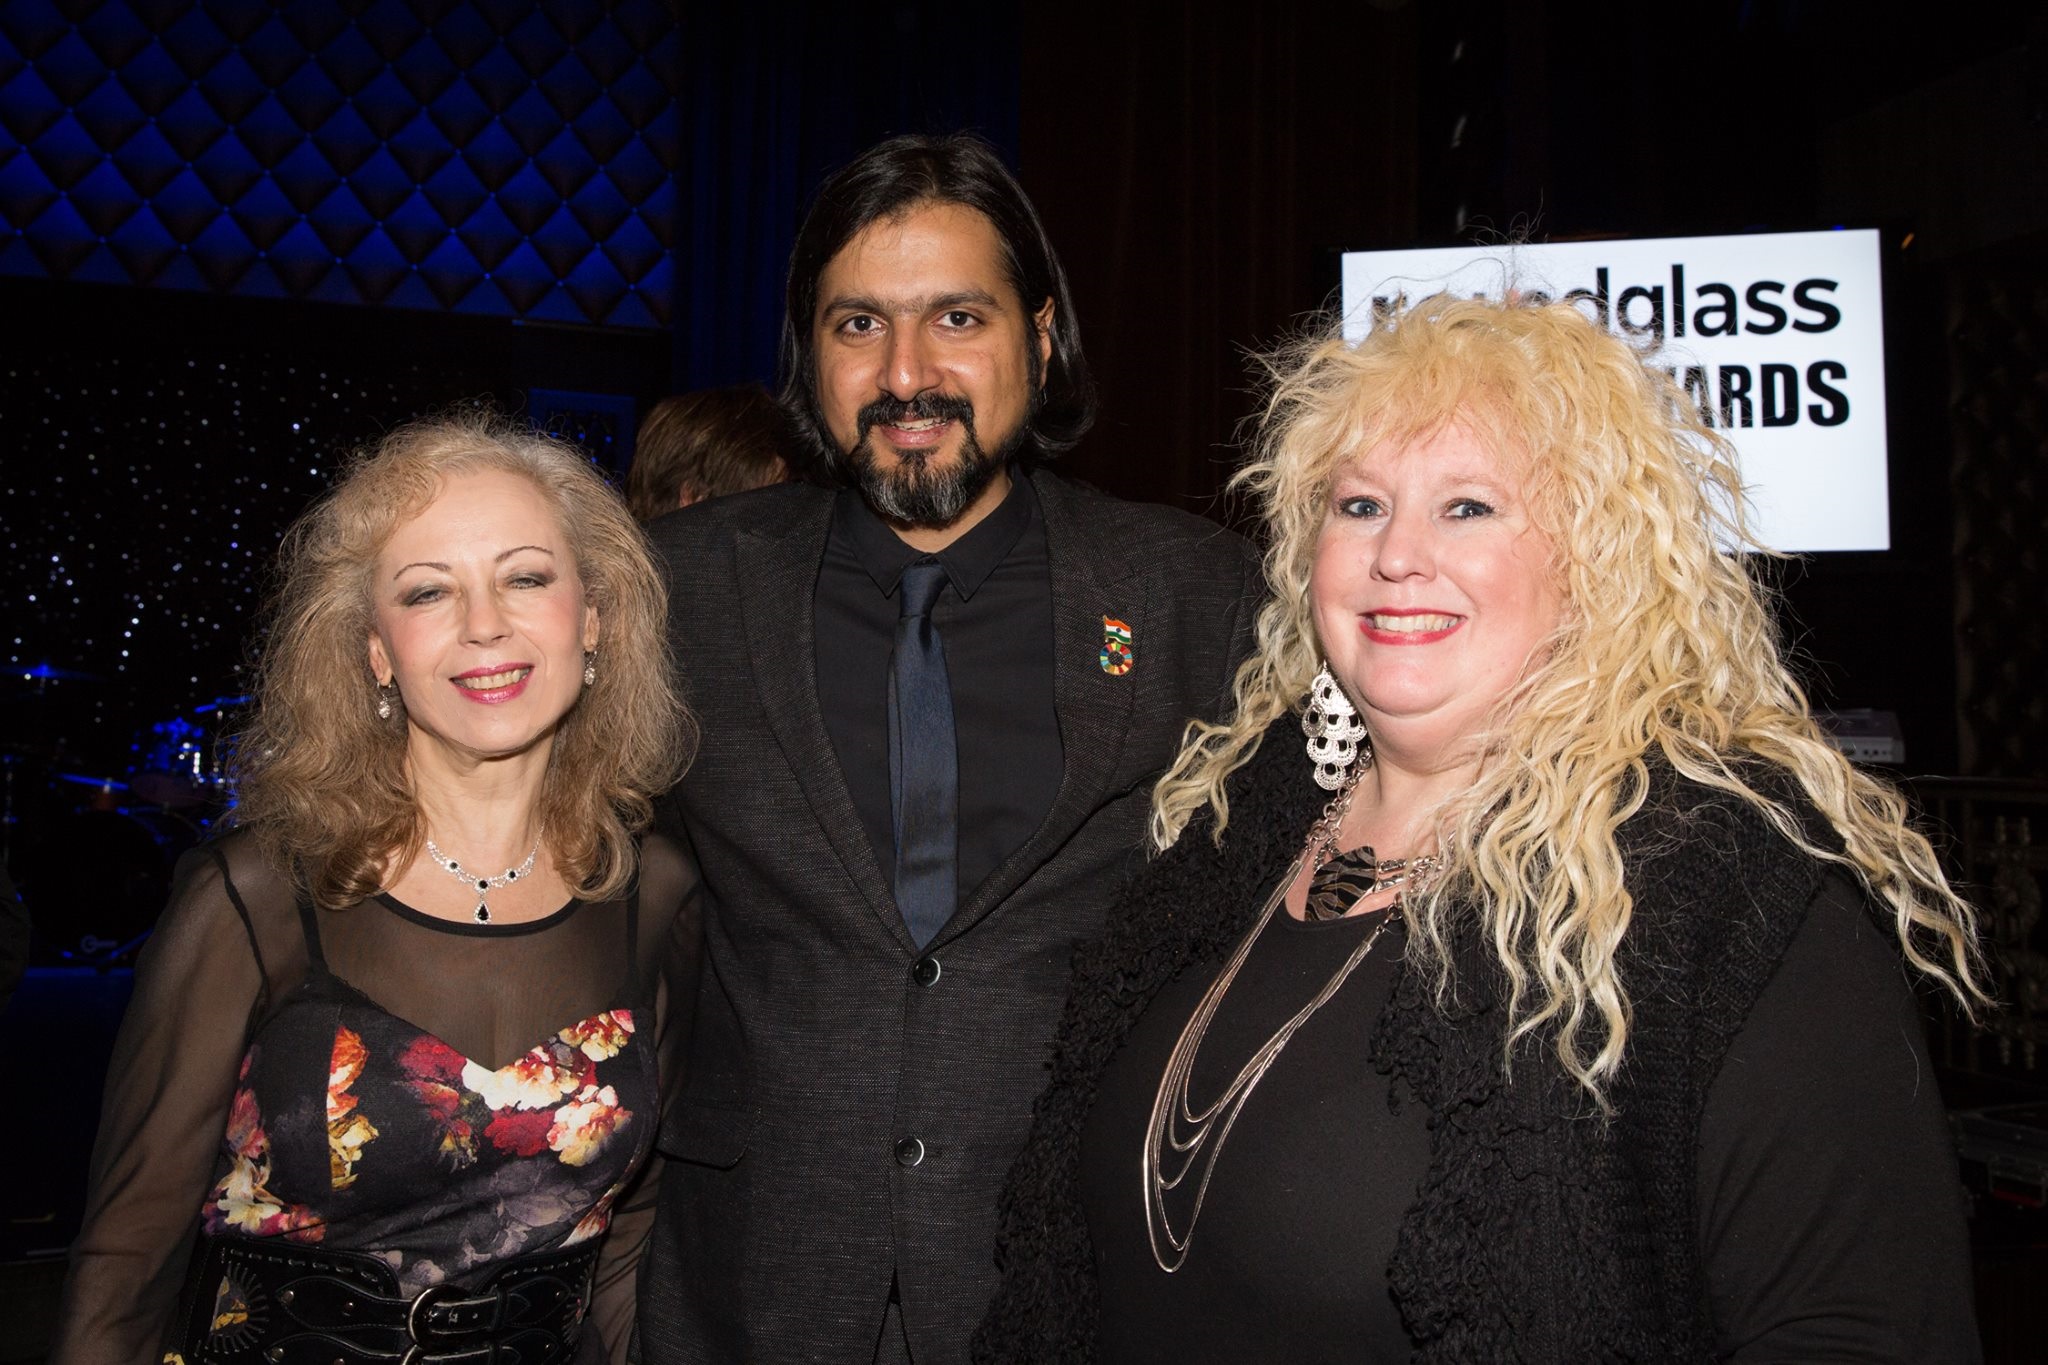 With Ricky Kej and Monique Grimme at RoundGlass Awards (during 60th Grammy Awards weekend)